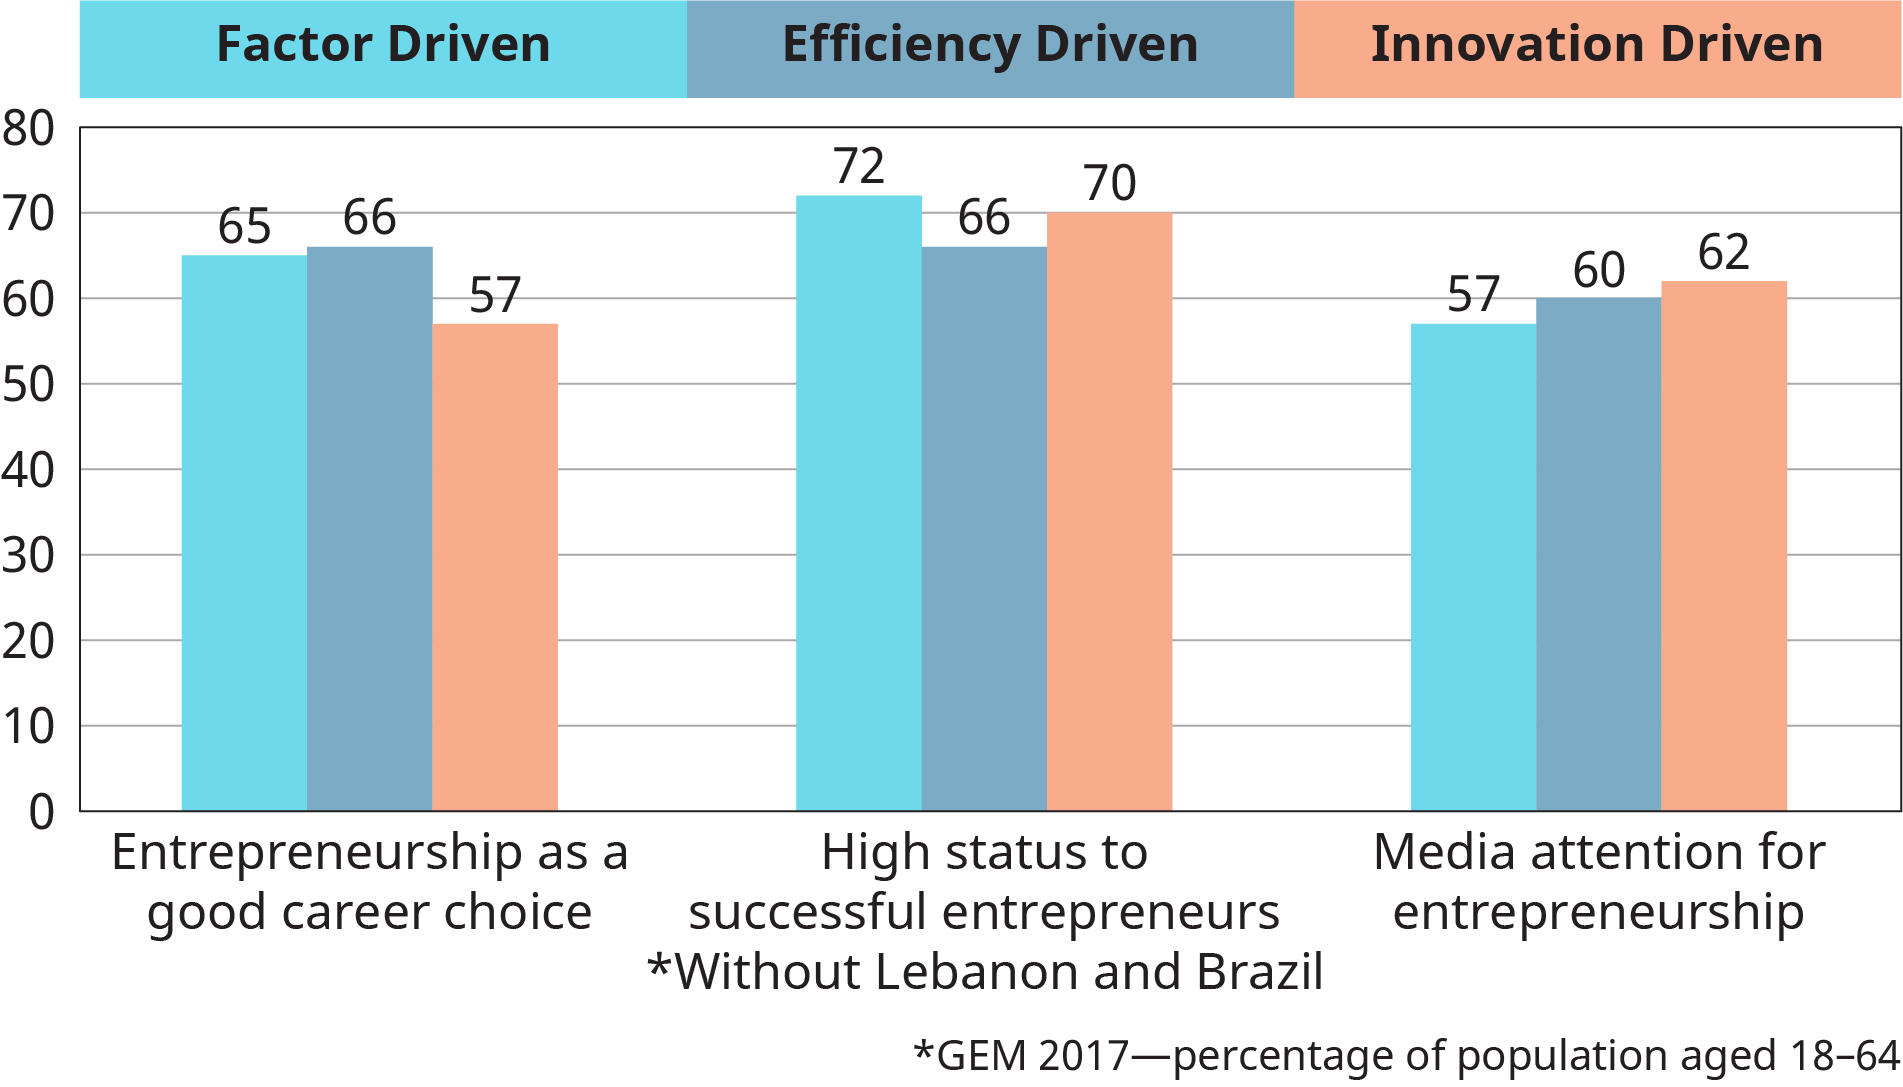 A graphical representation plots the development group averages for societal values about entrepreneurship based on factor driven, efficiency driven, and innovation driven.